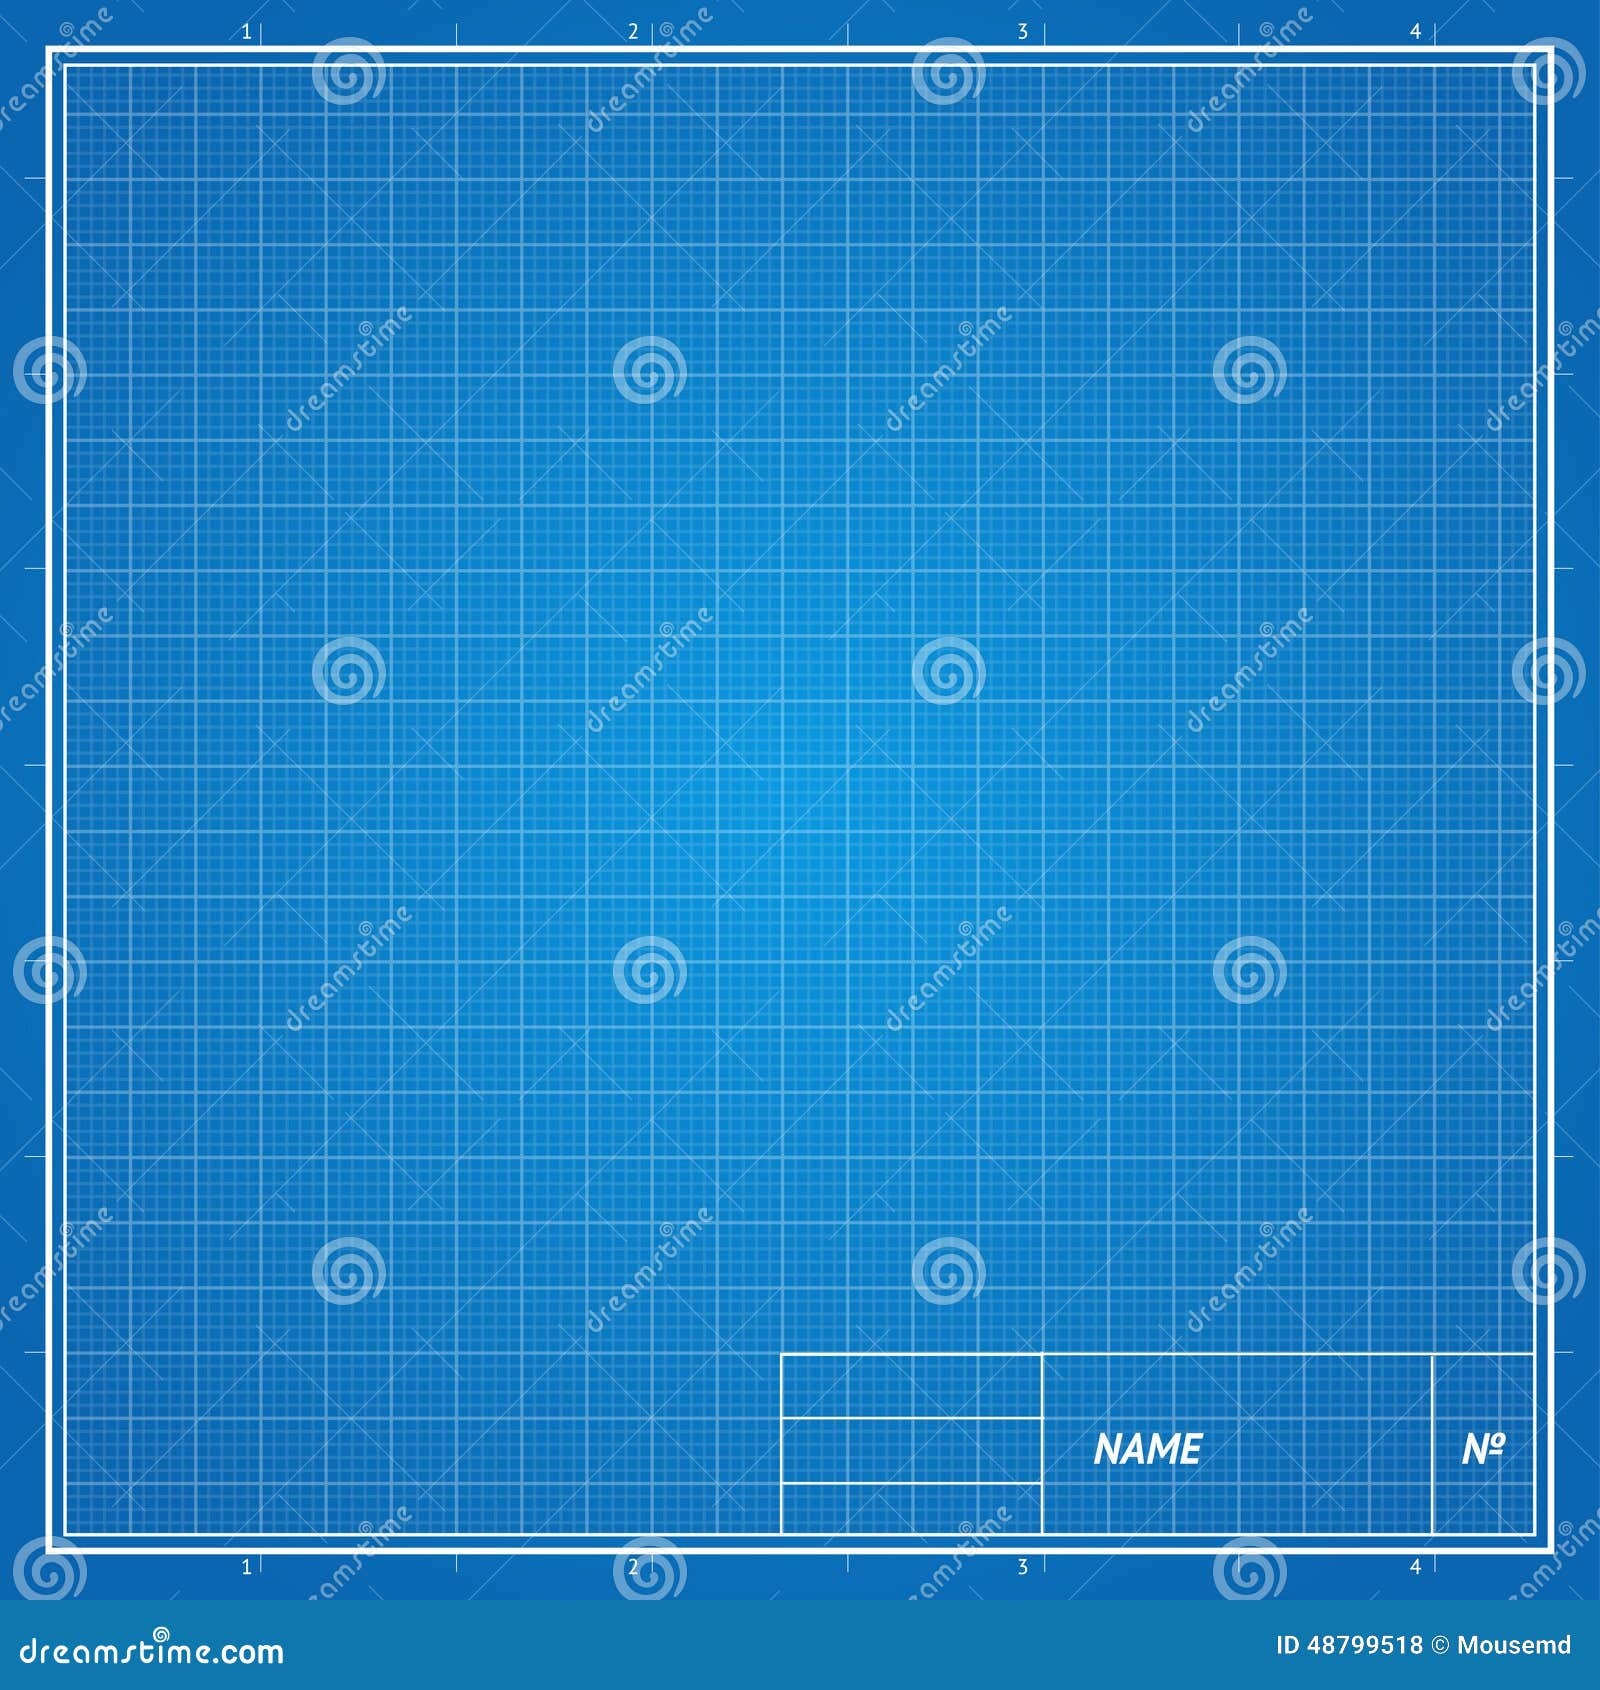 Blank Blueprint Paper Vector & Photo (Free Trial)